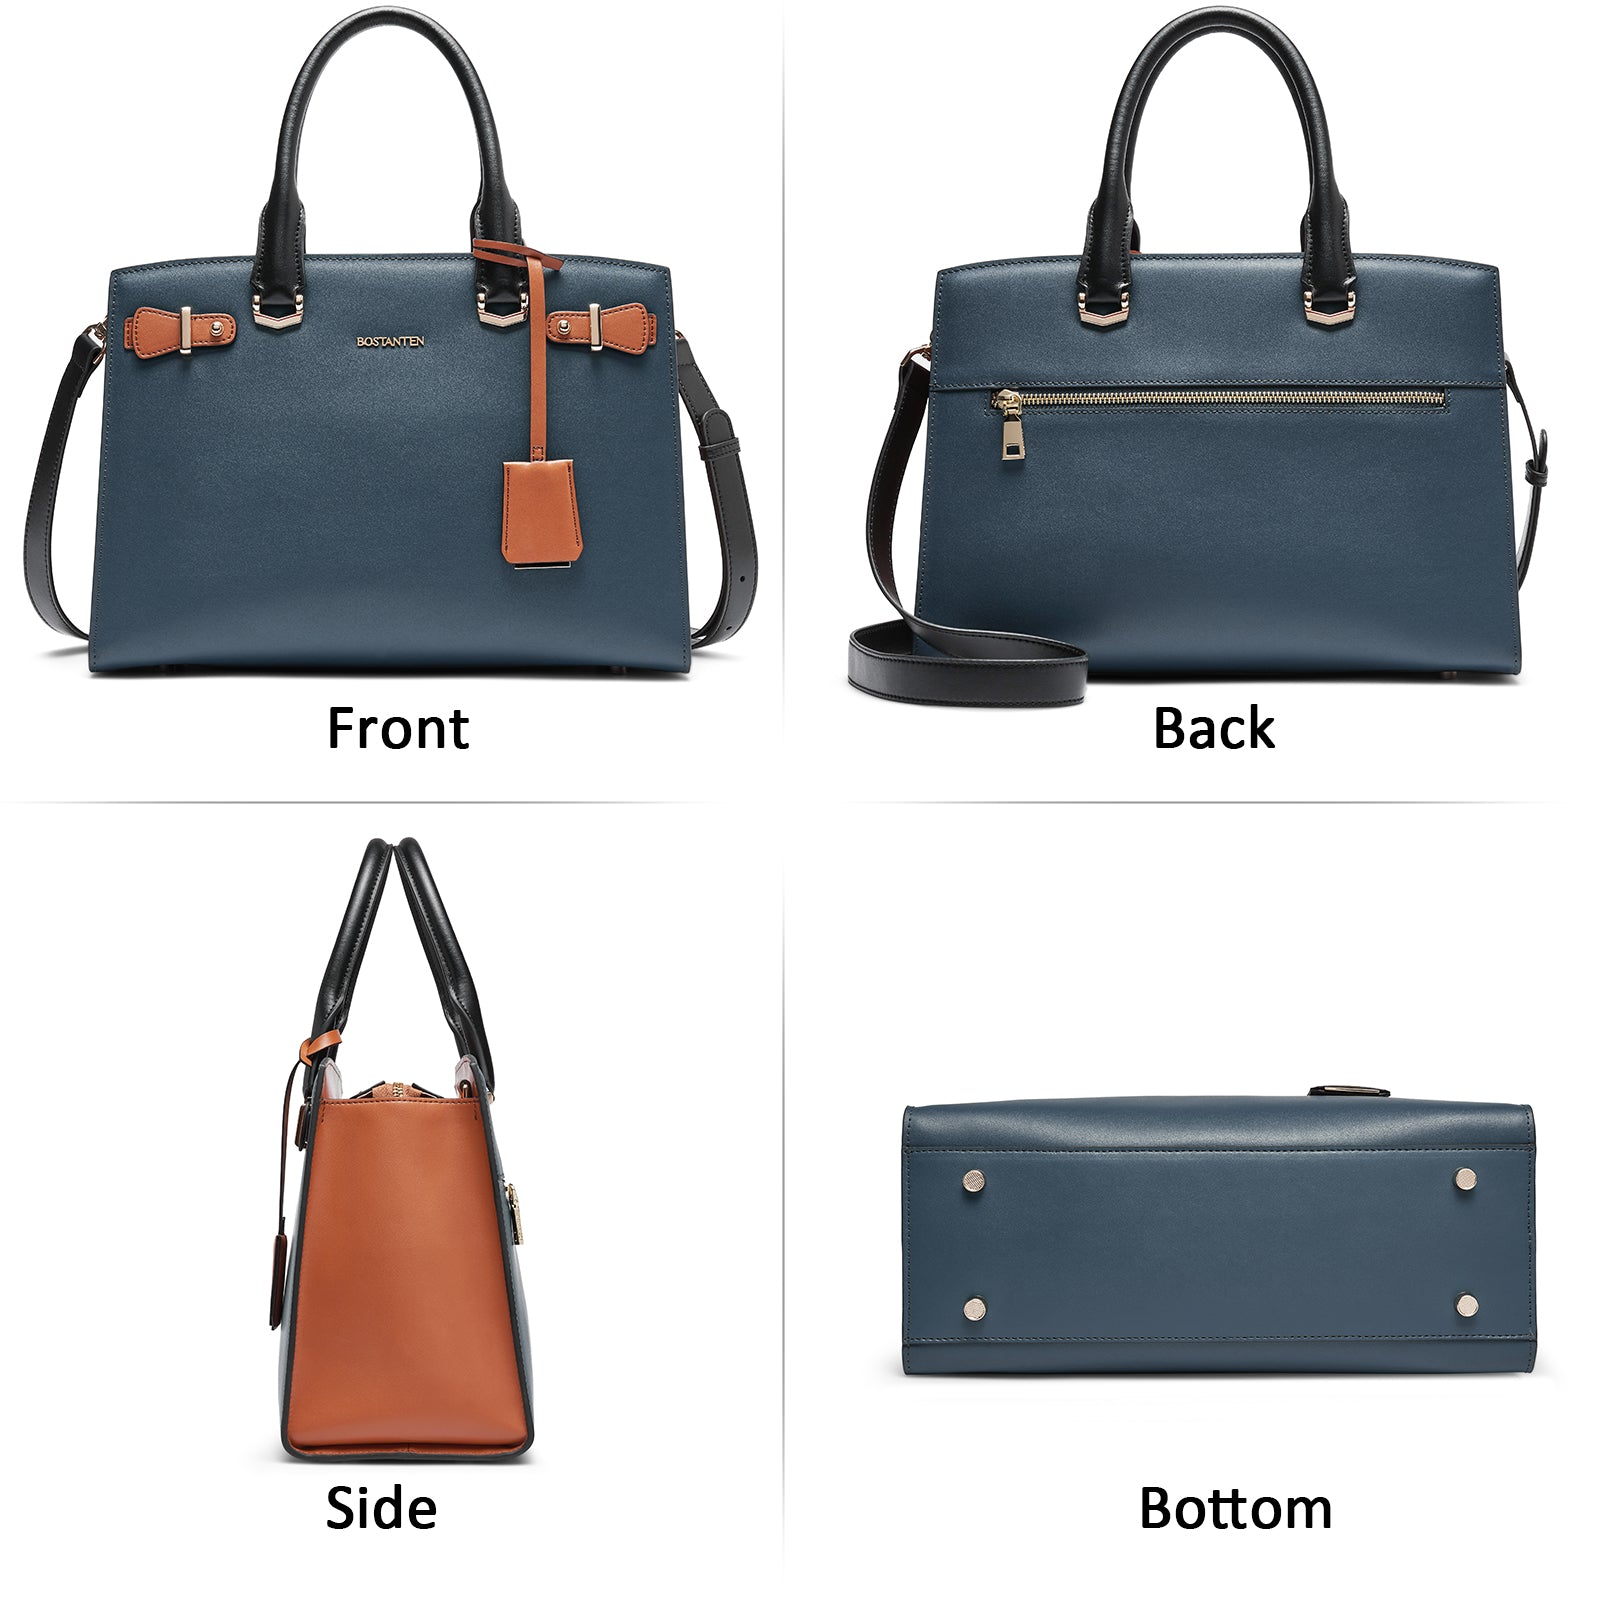 2023 Handbags Guide: 16 Type of Purses You Should Have